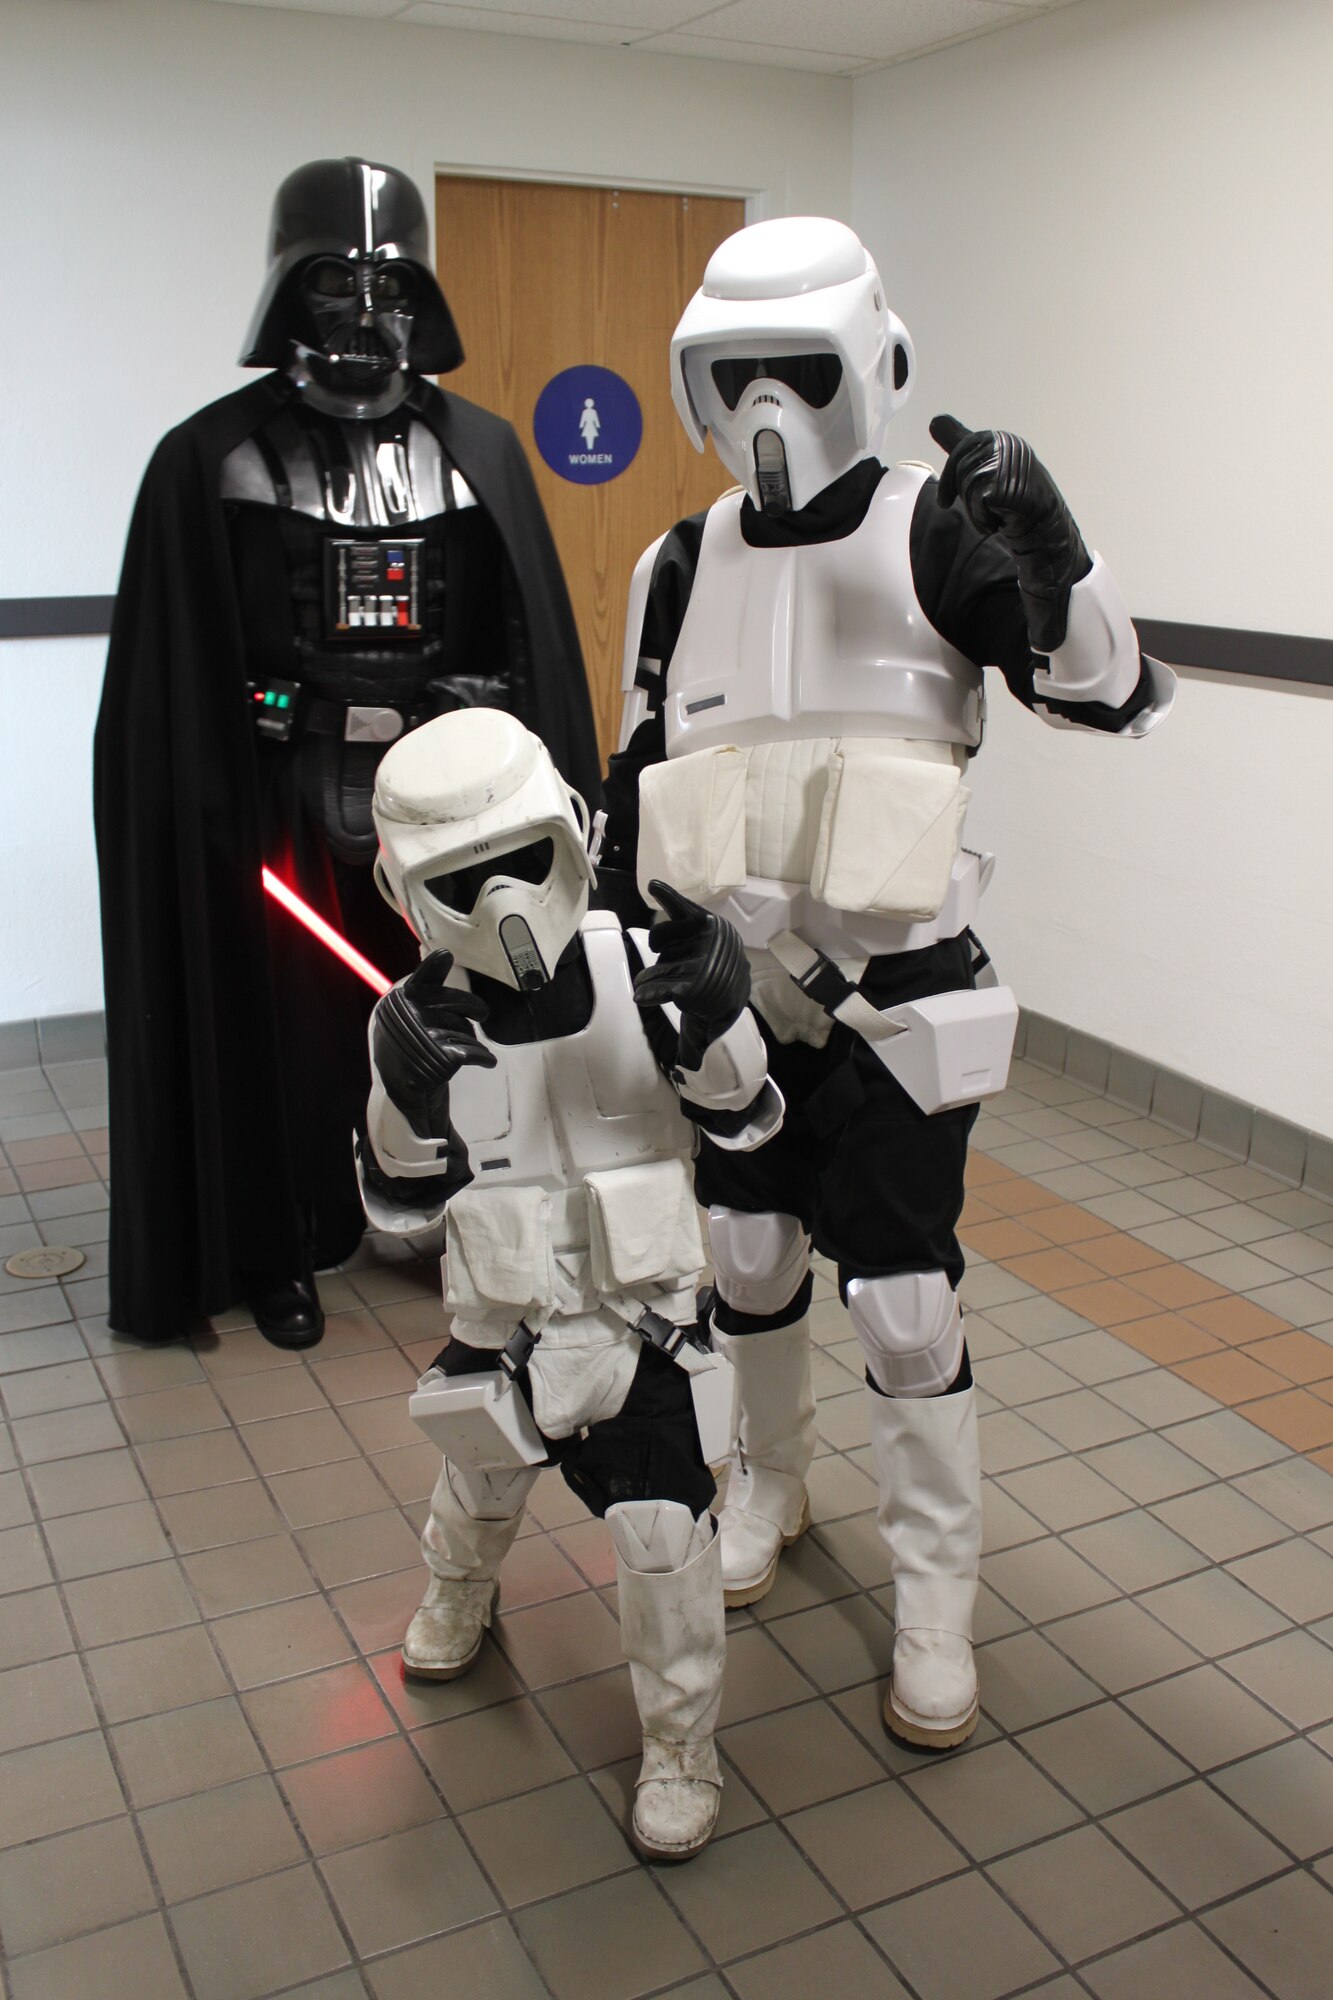 The 412th Mission Support Group invited the 501st Legion to help with the grand reopening of the base theater March 16. According to their website, the legion is a volunteer organization for “Star Wars” costume enthusiasts who promote interest in the franchise through the building and wearing of quality, accurate costumes, and participating in community events. (Courtesy photo by Kayla Fagan)